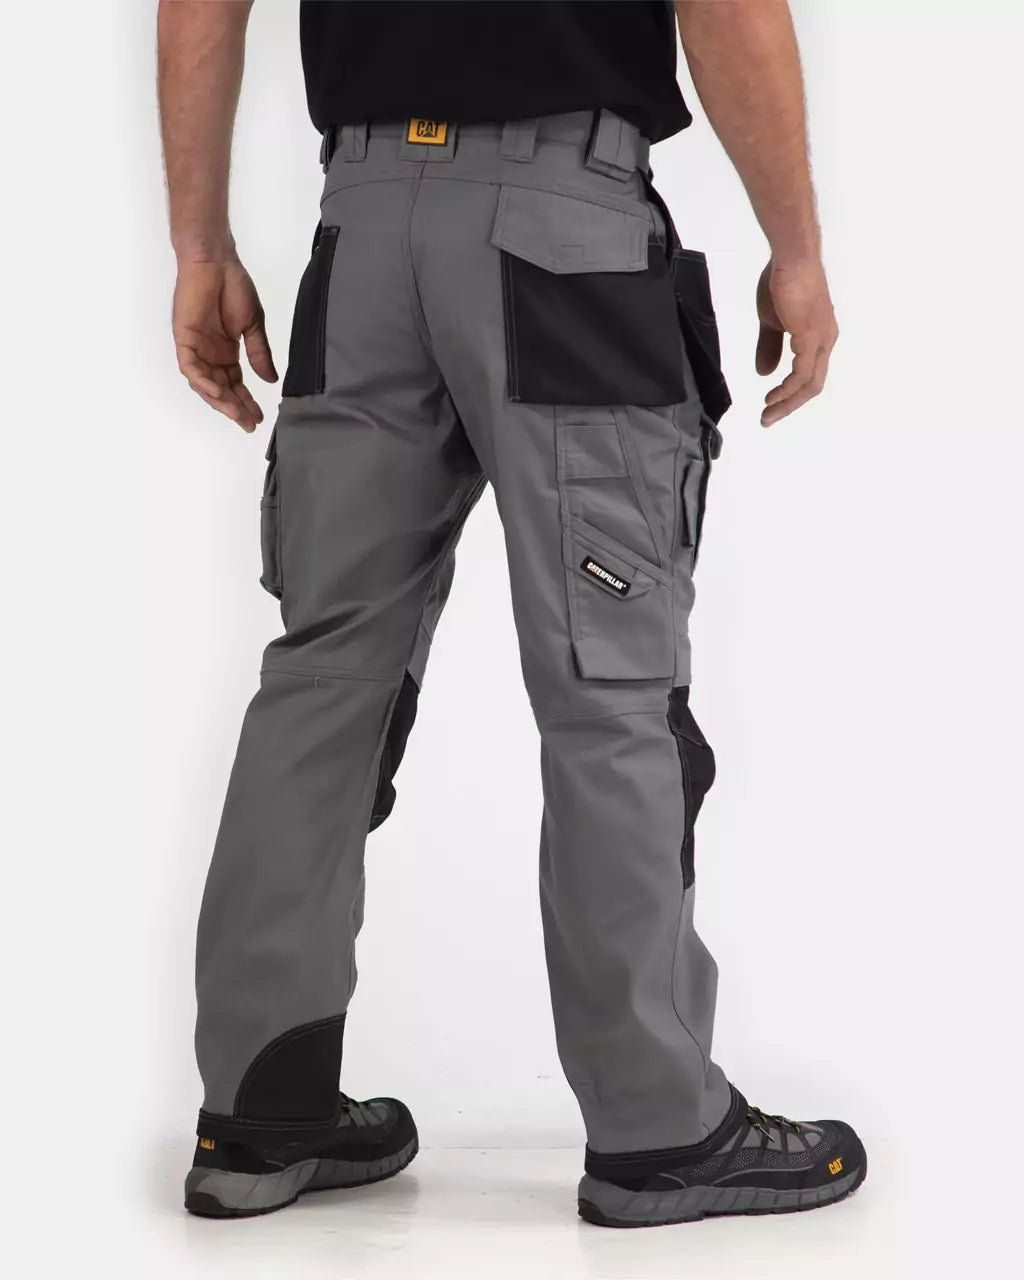  Caterpillar Advanced Stretch Trademark Work Pants for Men with  Articulated Knees, Side Cargo Pocket, and Dual Tool Pockets, Black - 34W X  30L : Tools & Home Improvement